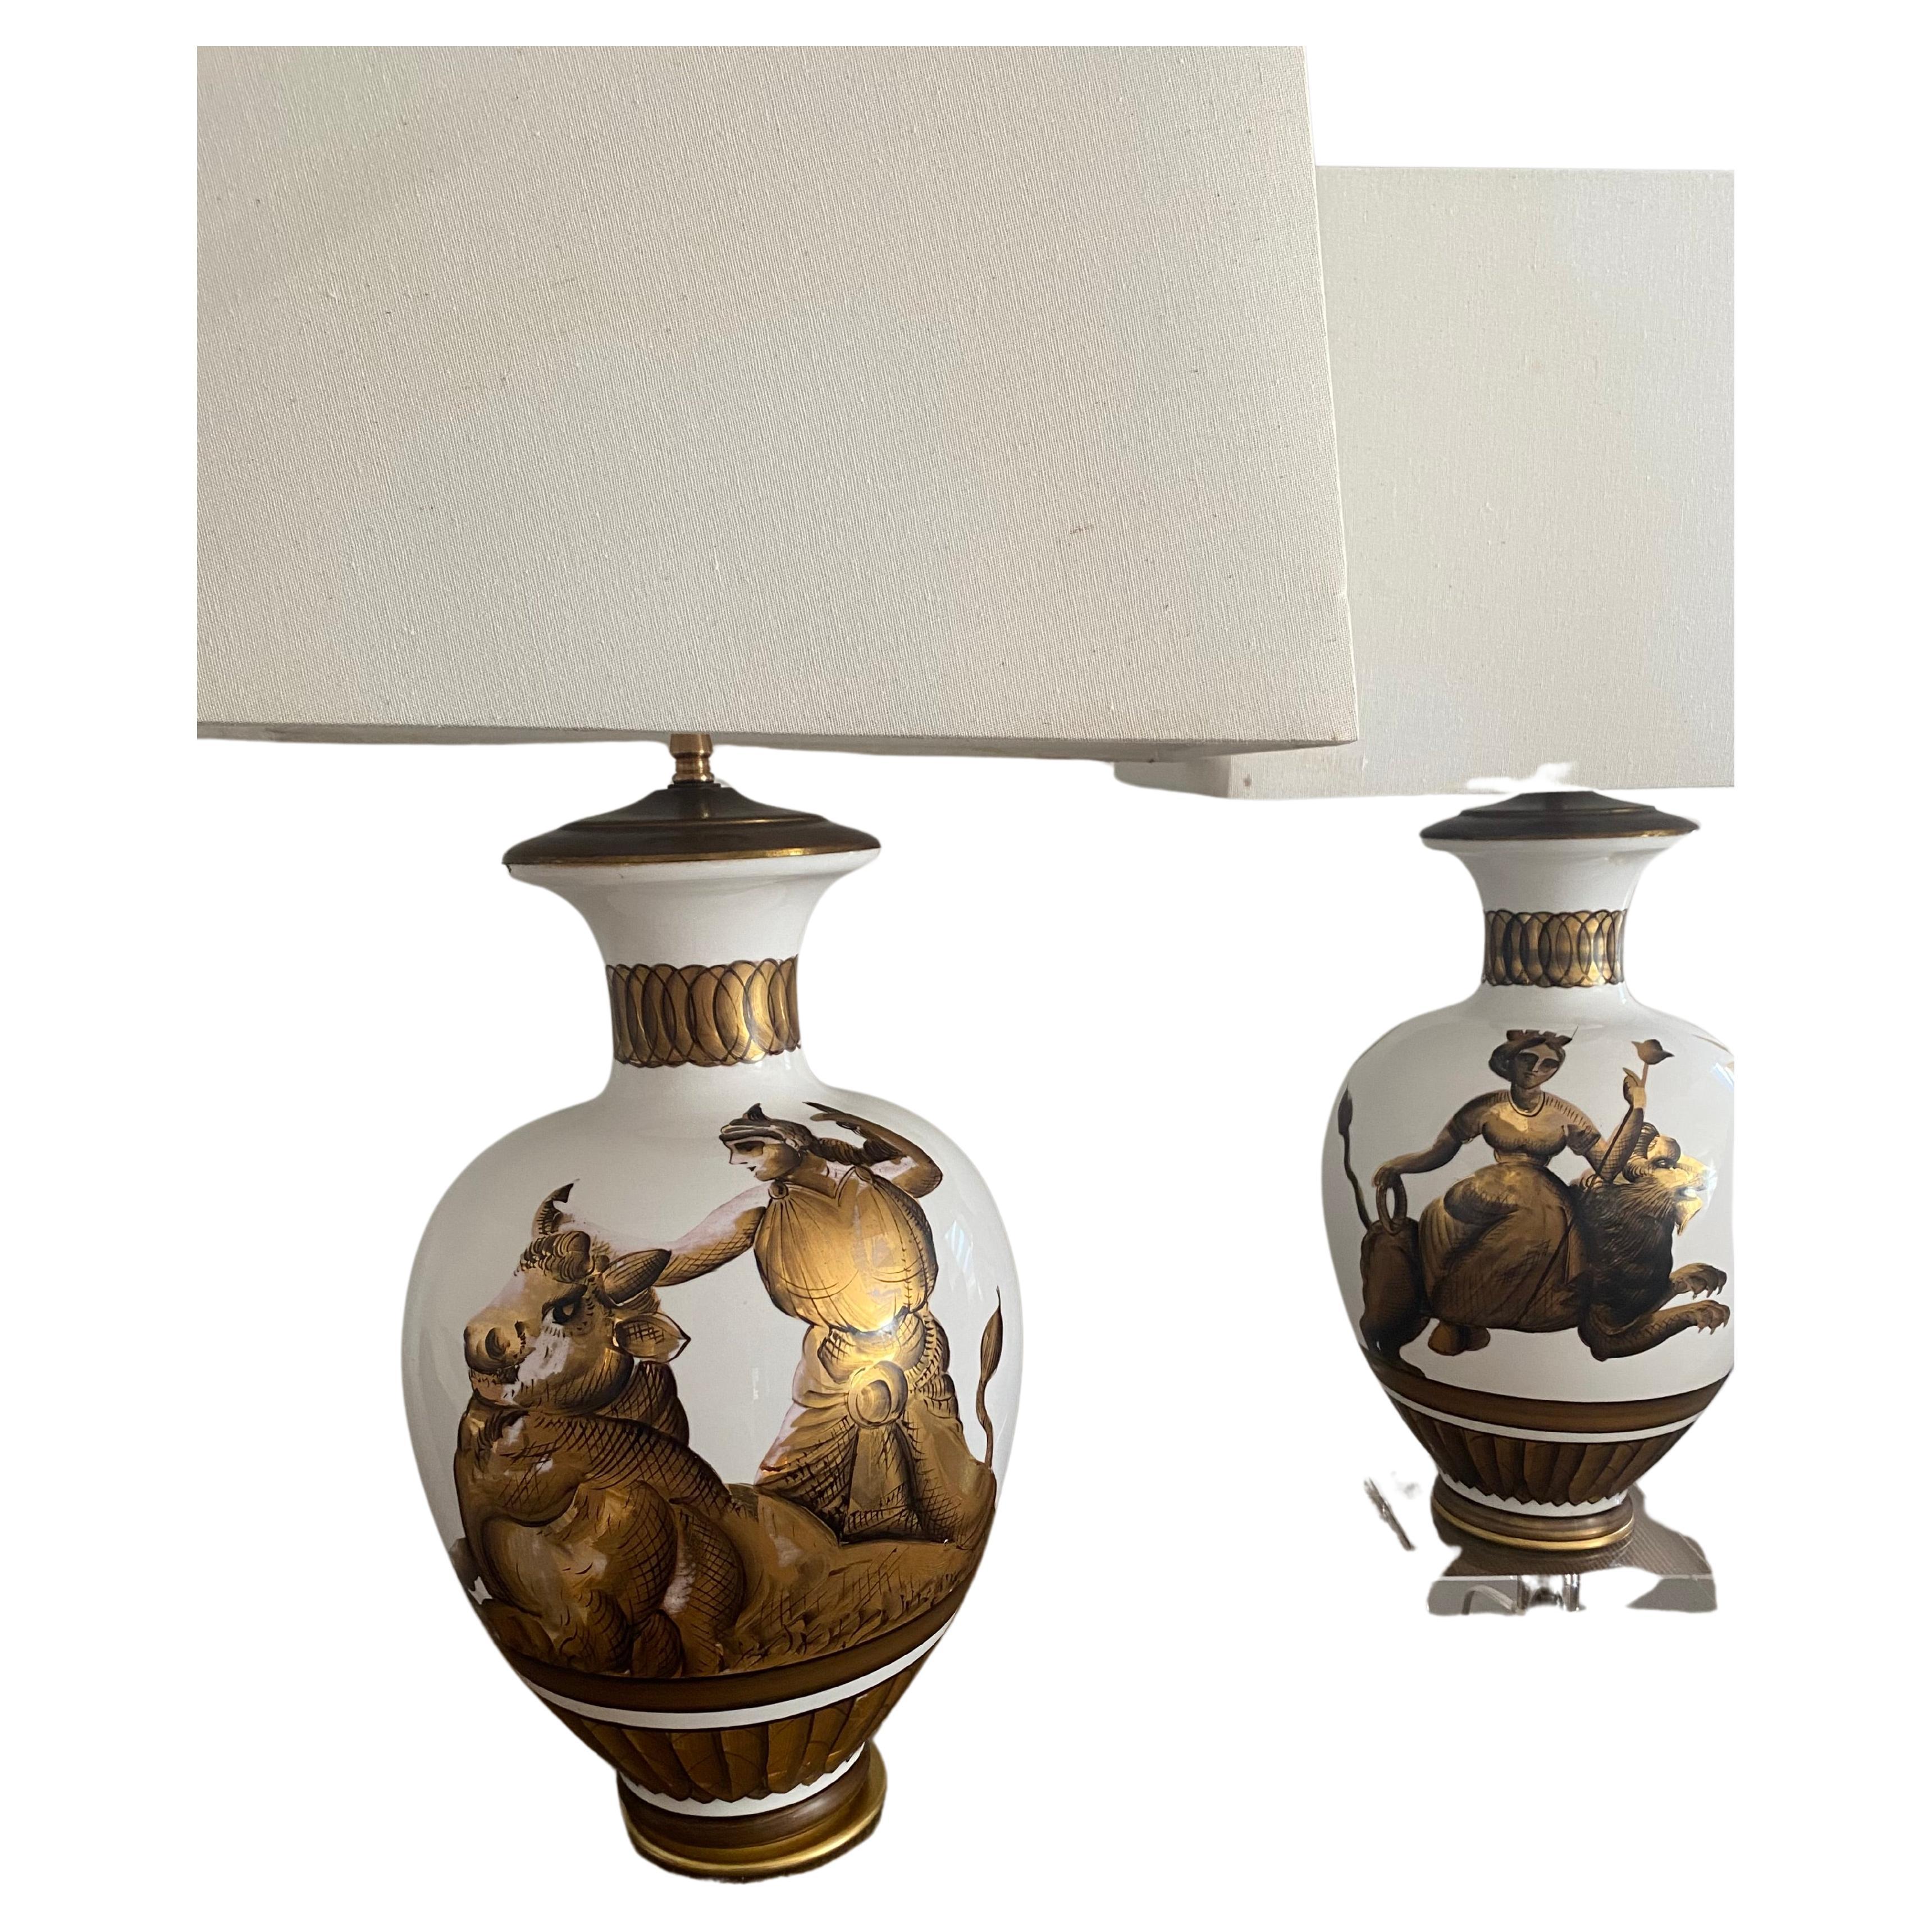 Parzinger Milk glass table lamps with gold painted classical figures mid century For Sale